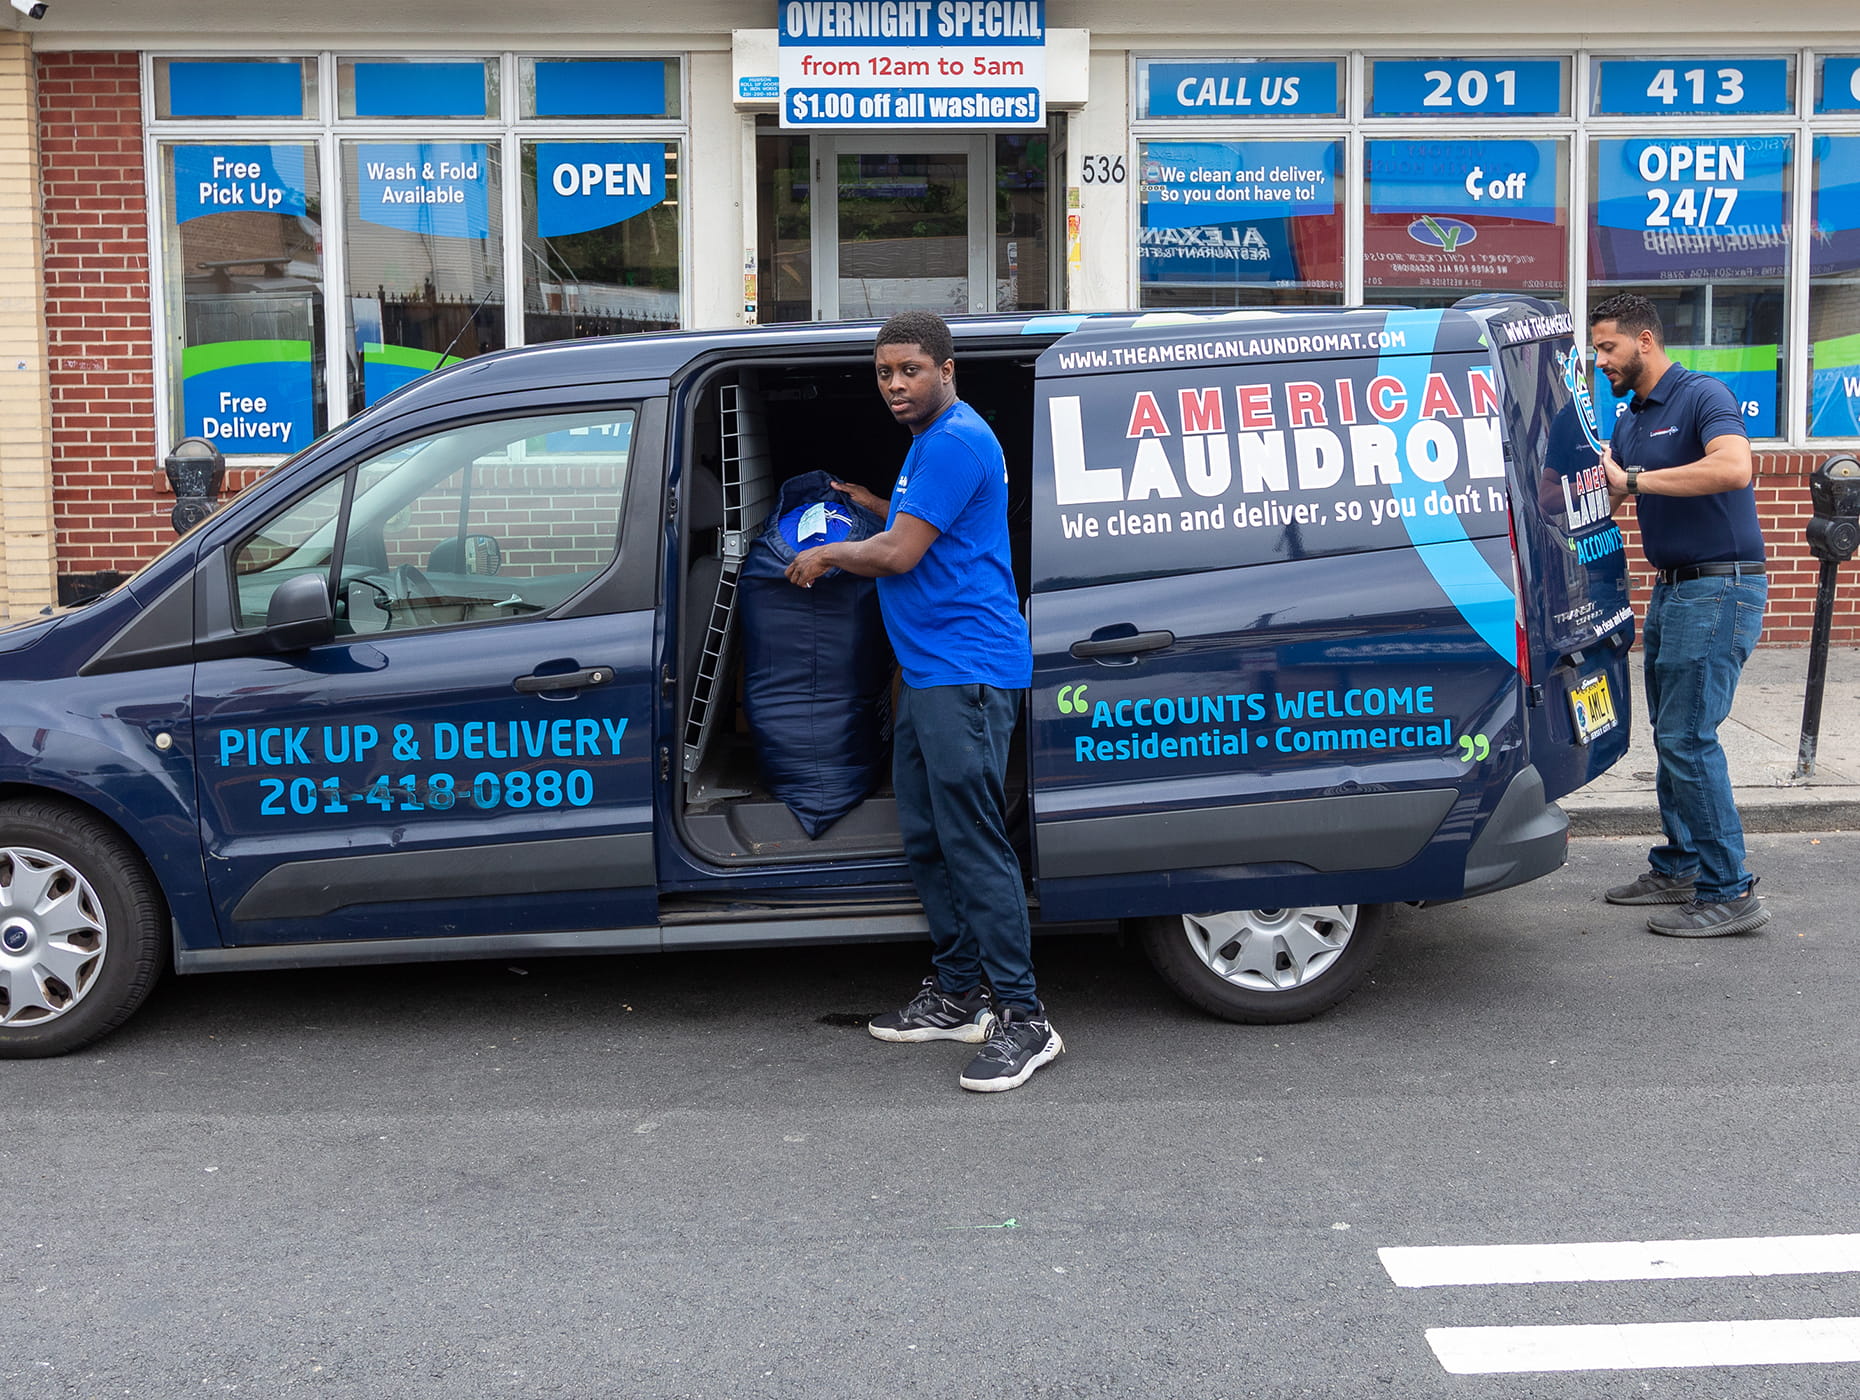 Residential and Commercial Laundry Pickup and Delivery. 24-hour turnover available.